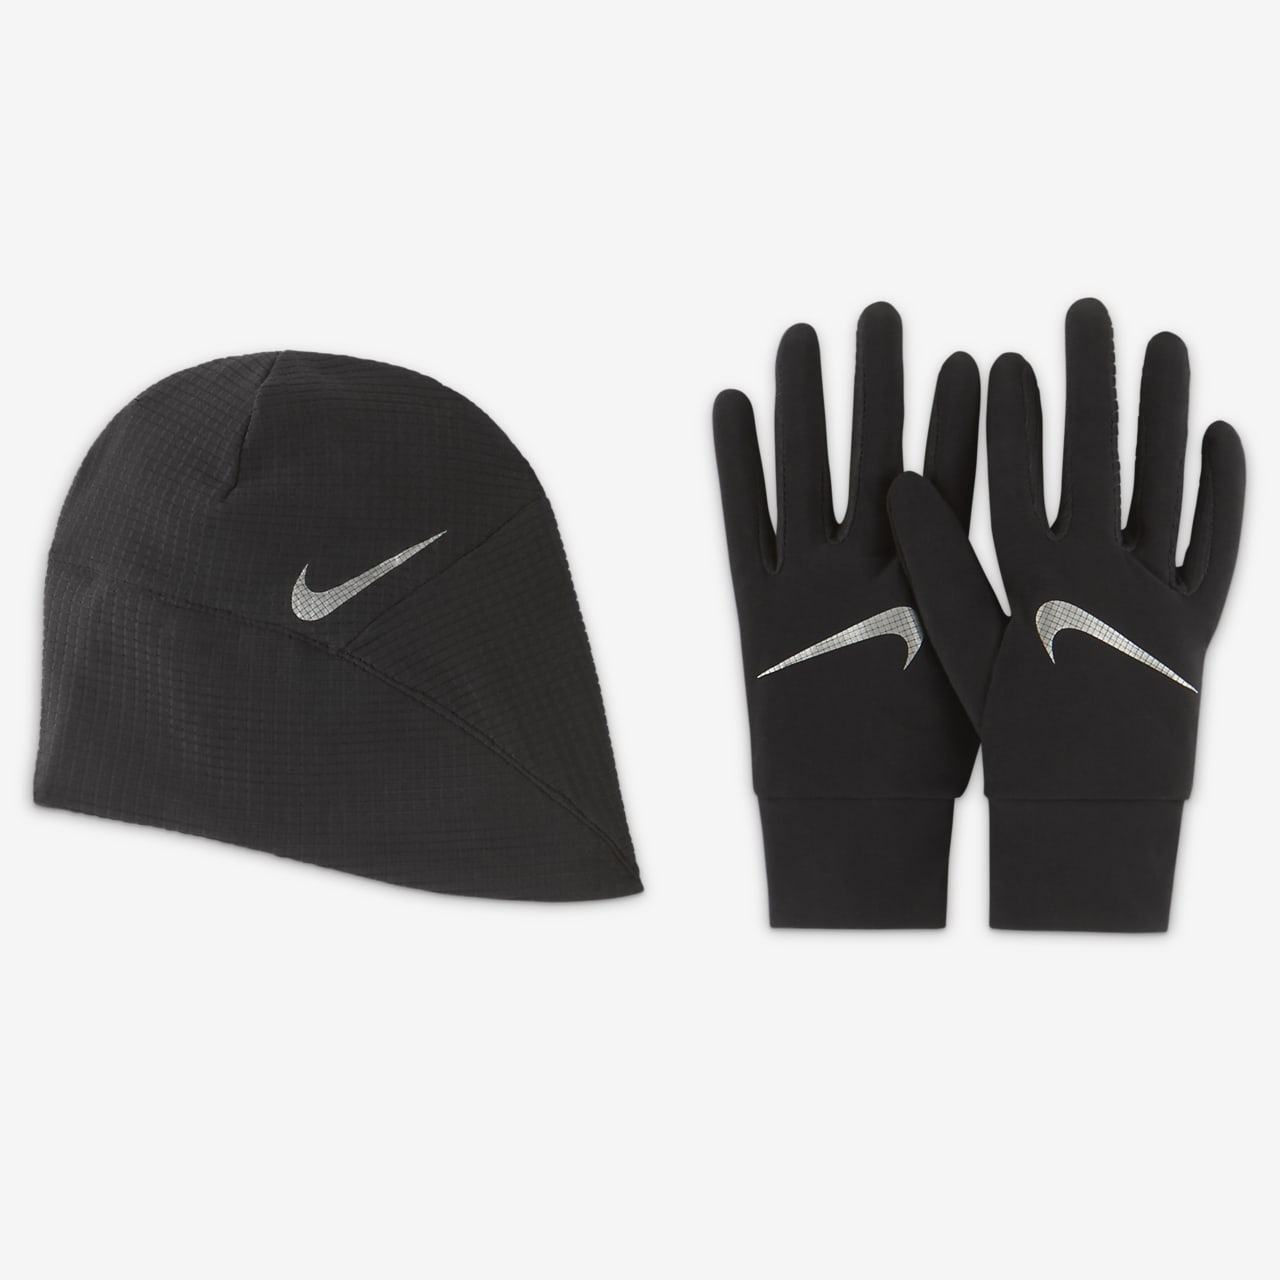 Nike Essential Men's Hat and Glove Set.